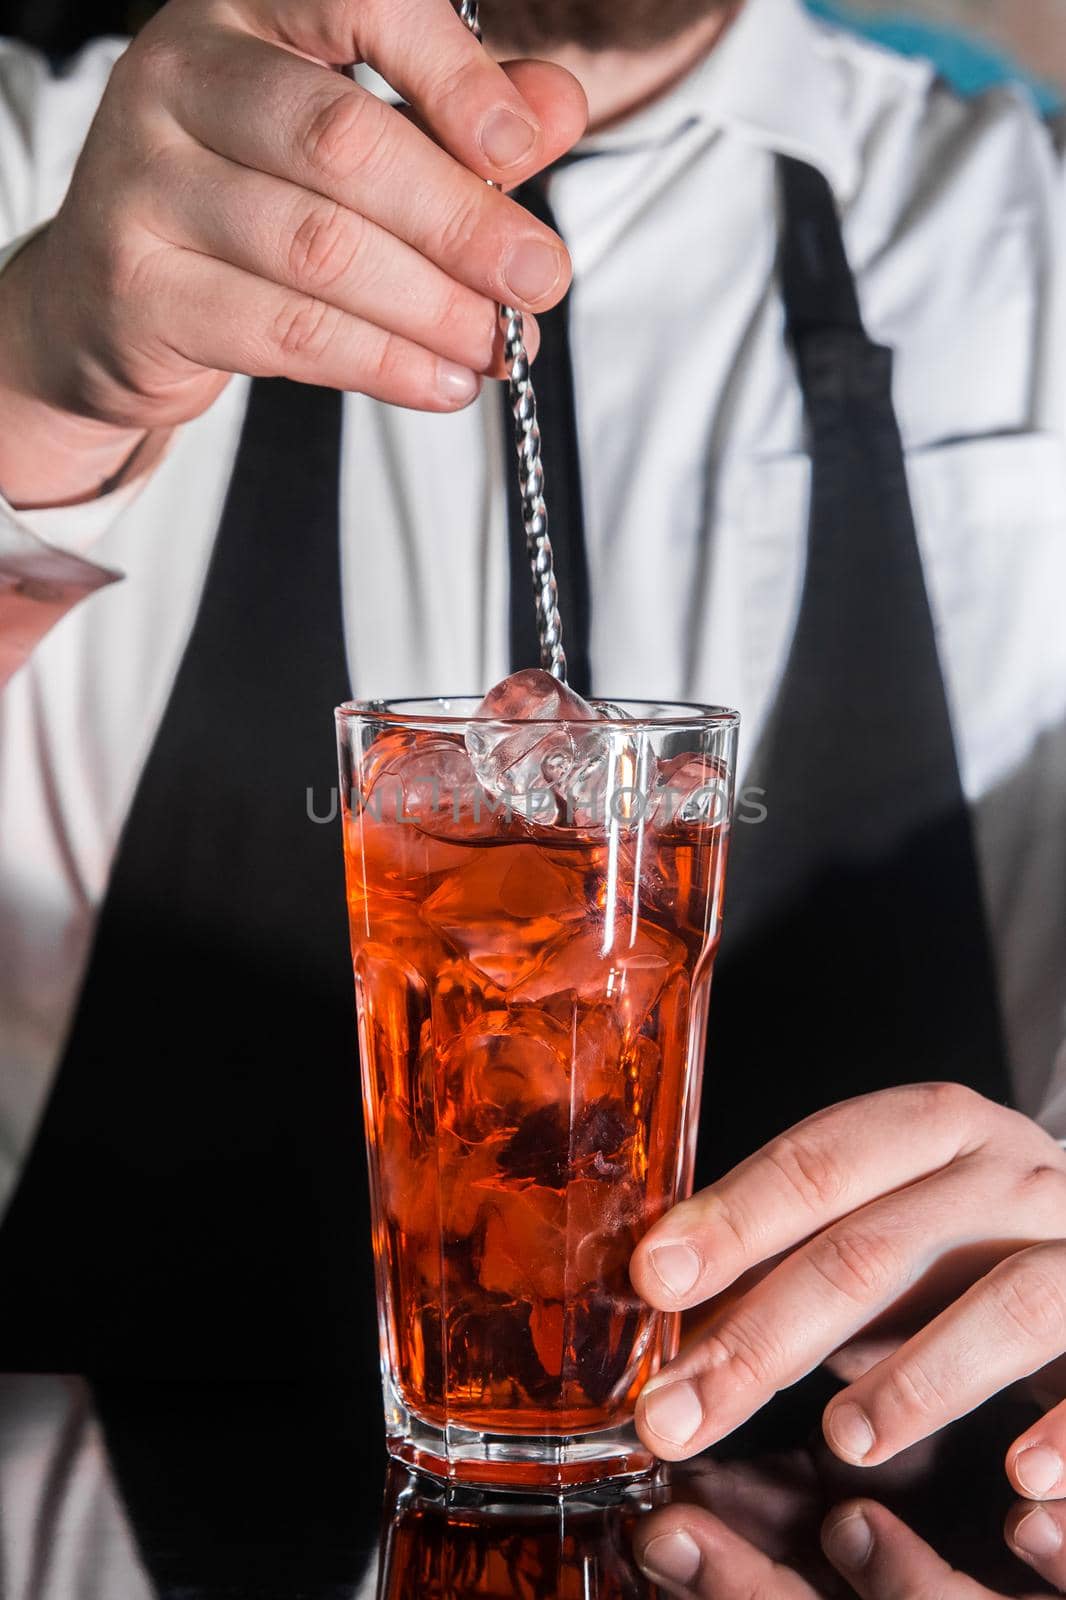 The hand of a professional bartender stirs the red syrup in an alcoholic cocktail with a bar spoon on the bar counter. The process of preparing an alcoholic beverage by AYDO8